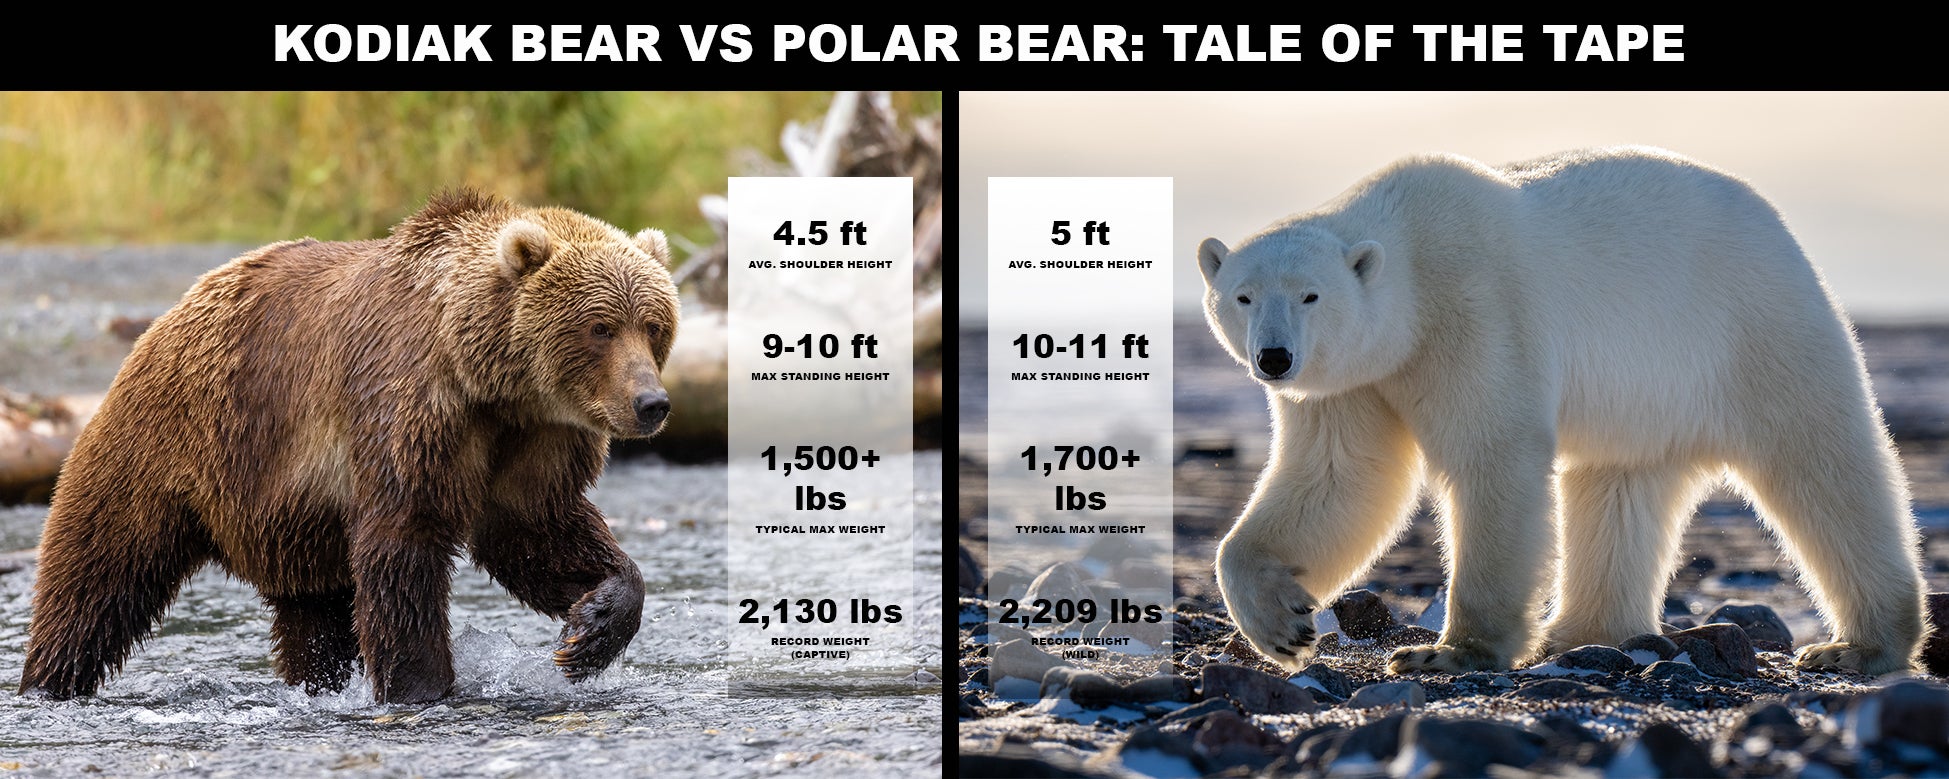 Kodiak bear on left with height and weight stats; polar bear on right with same